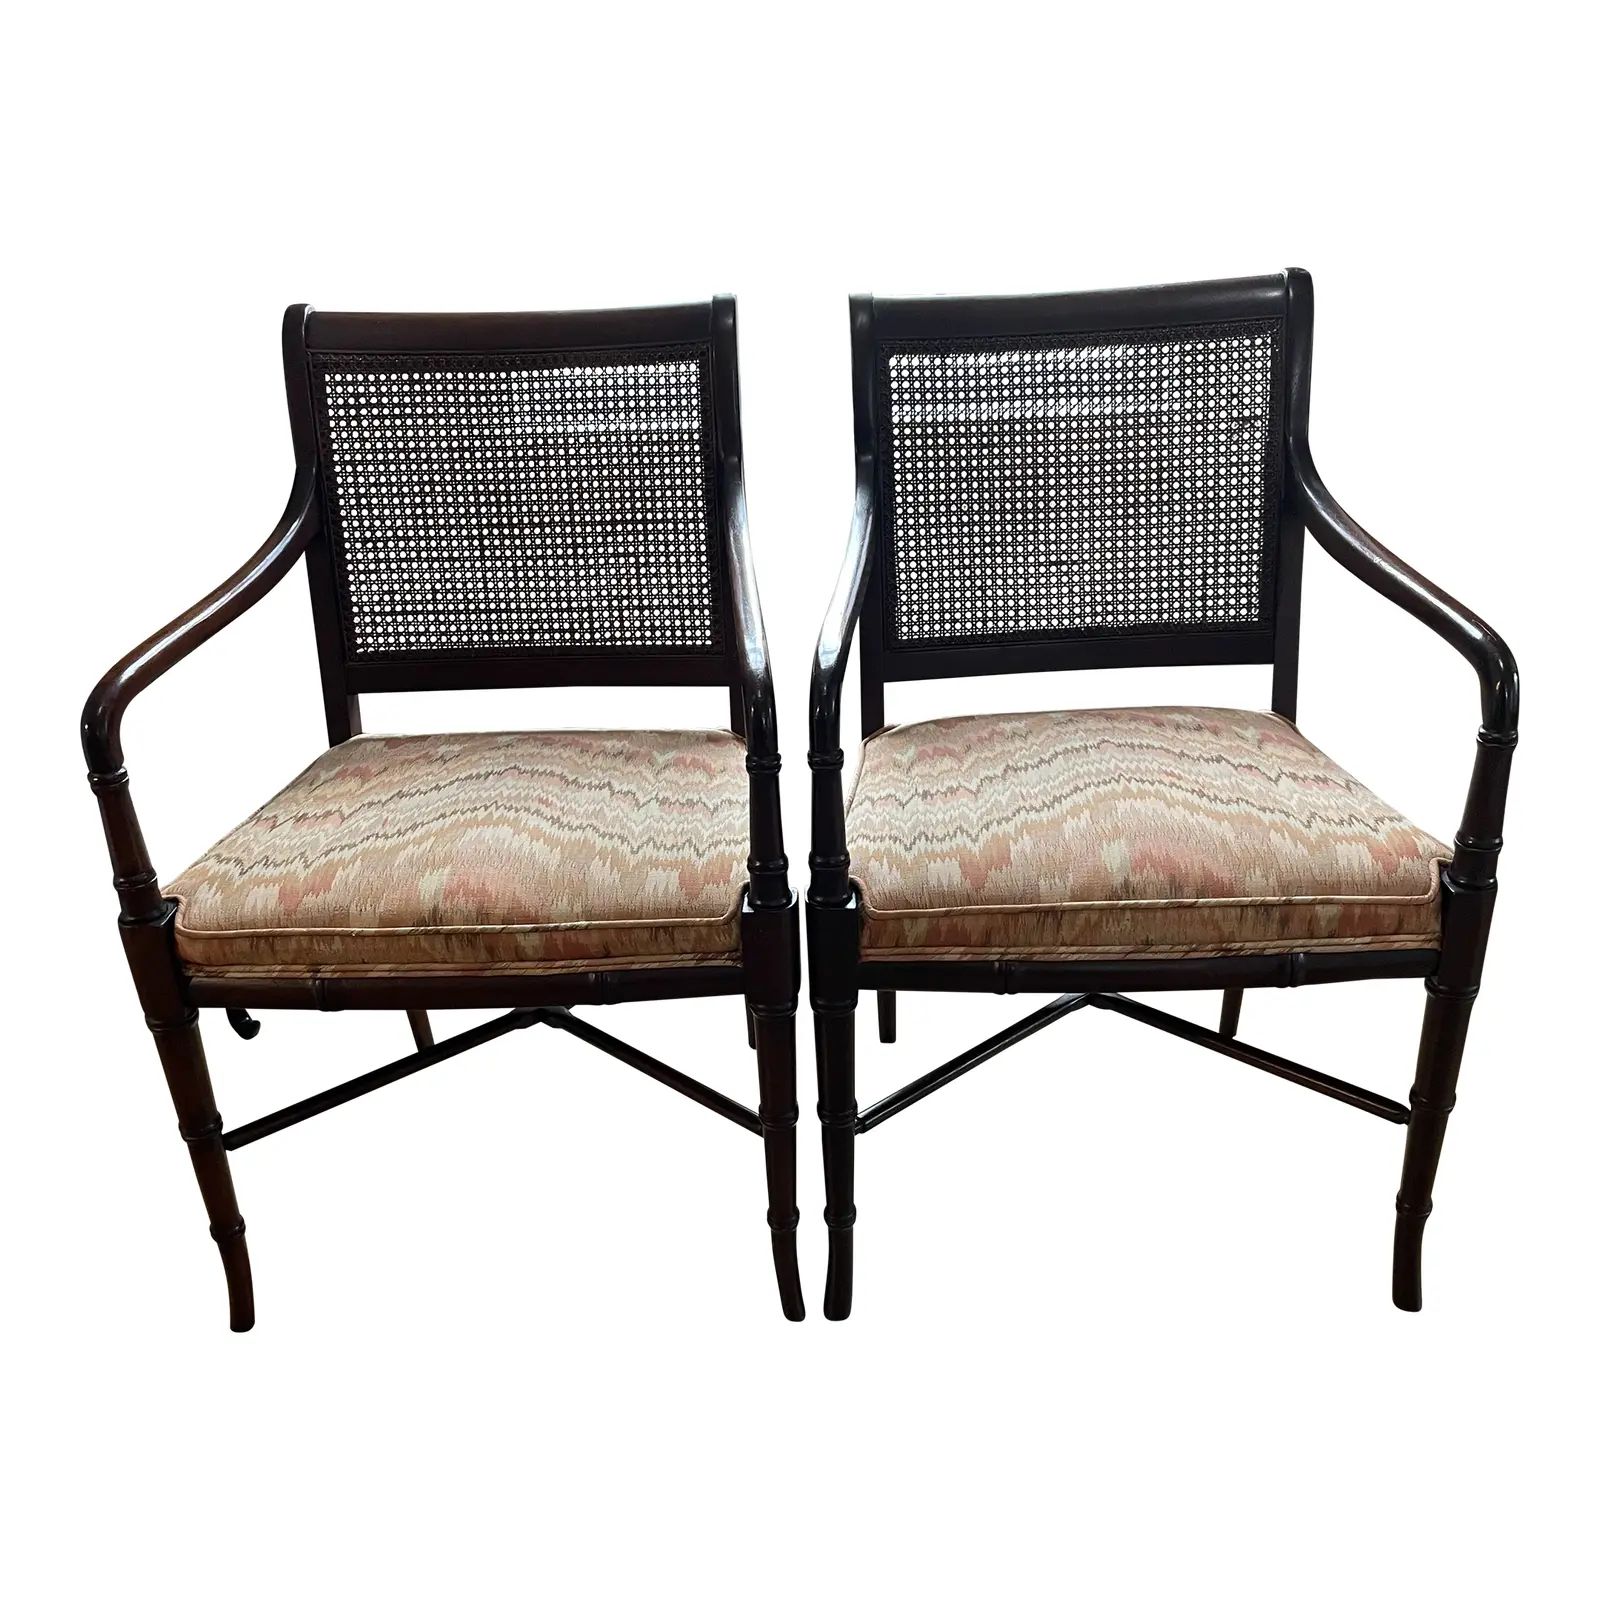 1970’s Hickory Chair Faux Bamboo Caned Regency Chairs - a Pair | Chairish